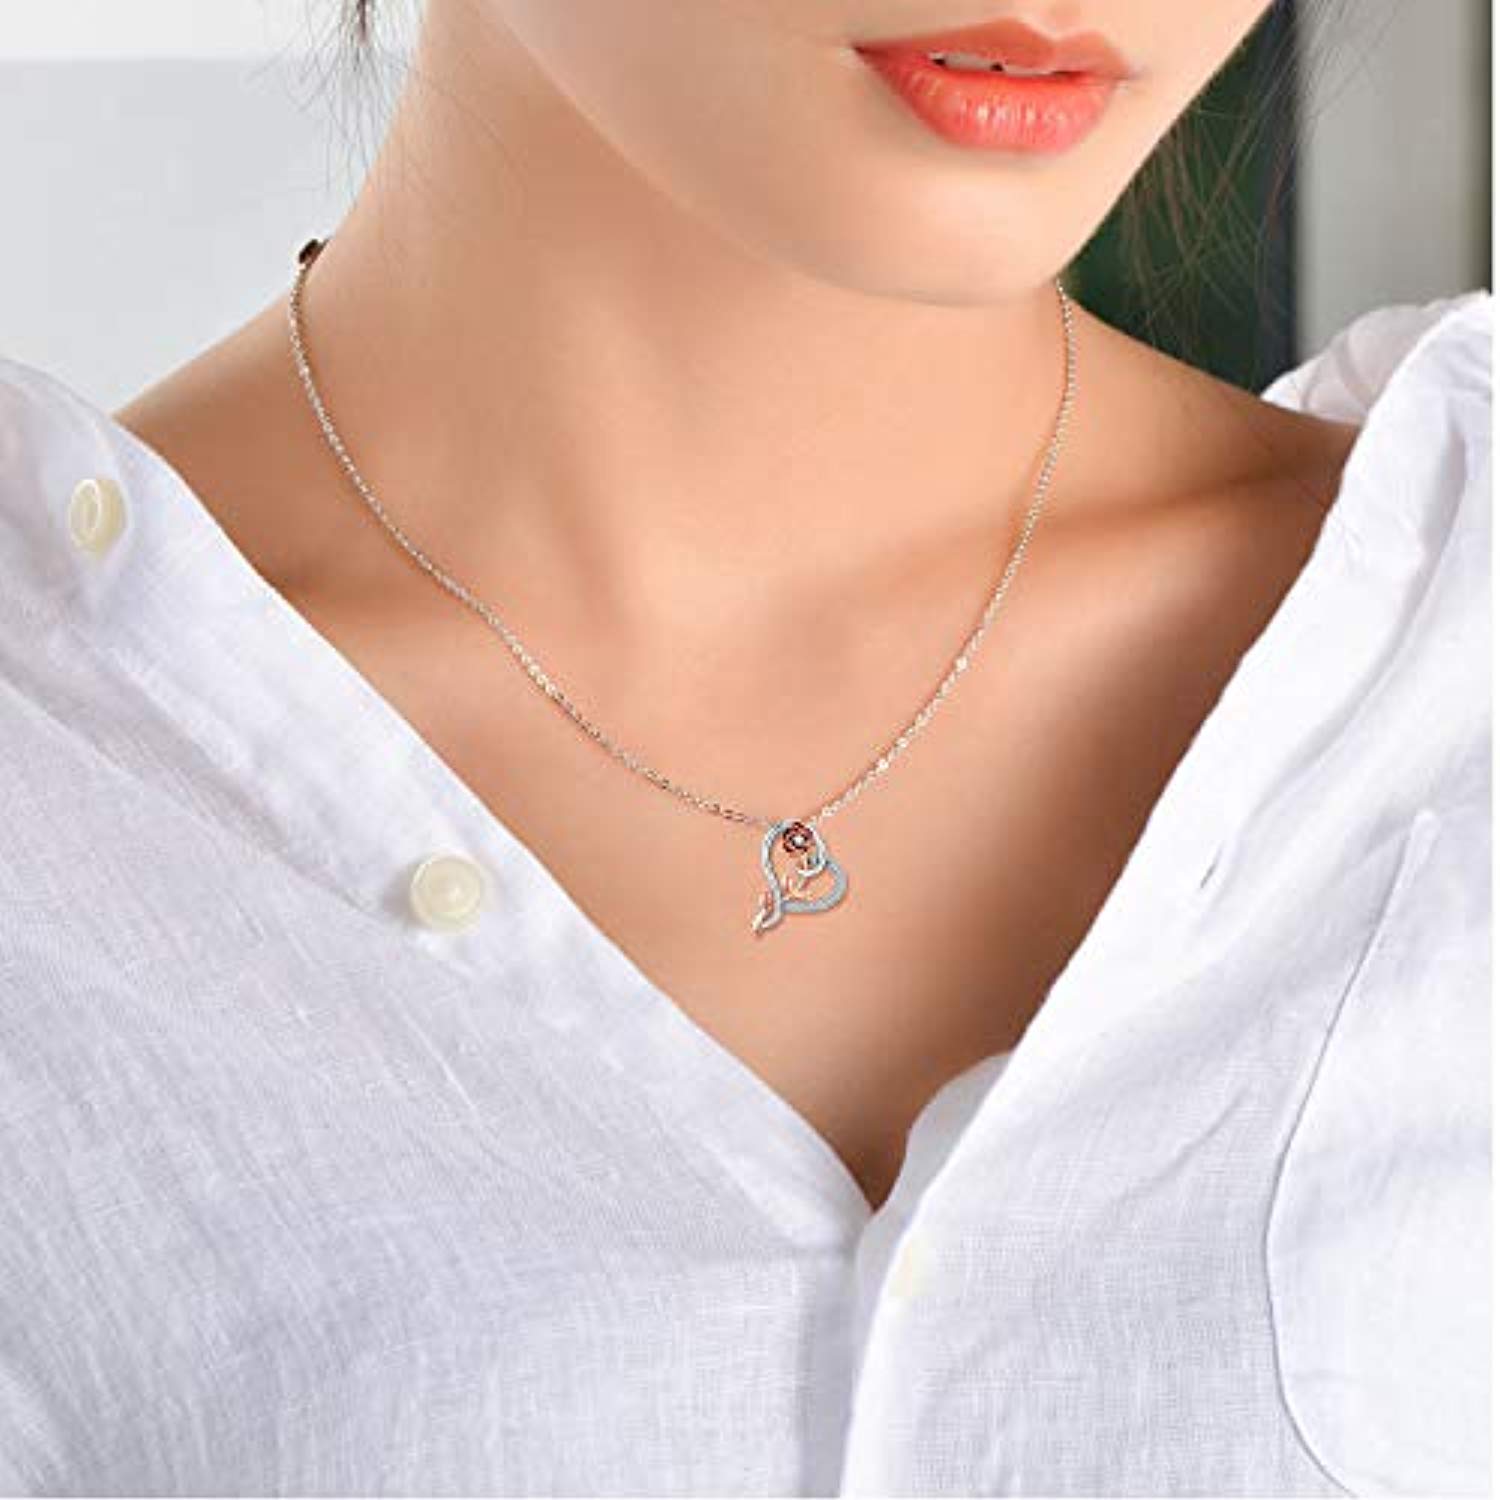 Sterling Silver Rose Flower Love Heart Pendant Necklace Jewelry Gifts for Women